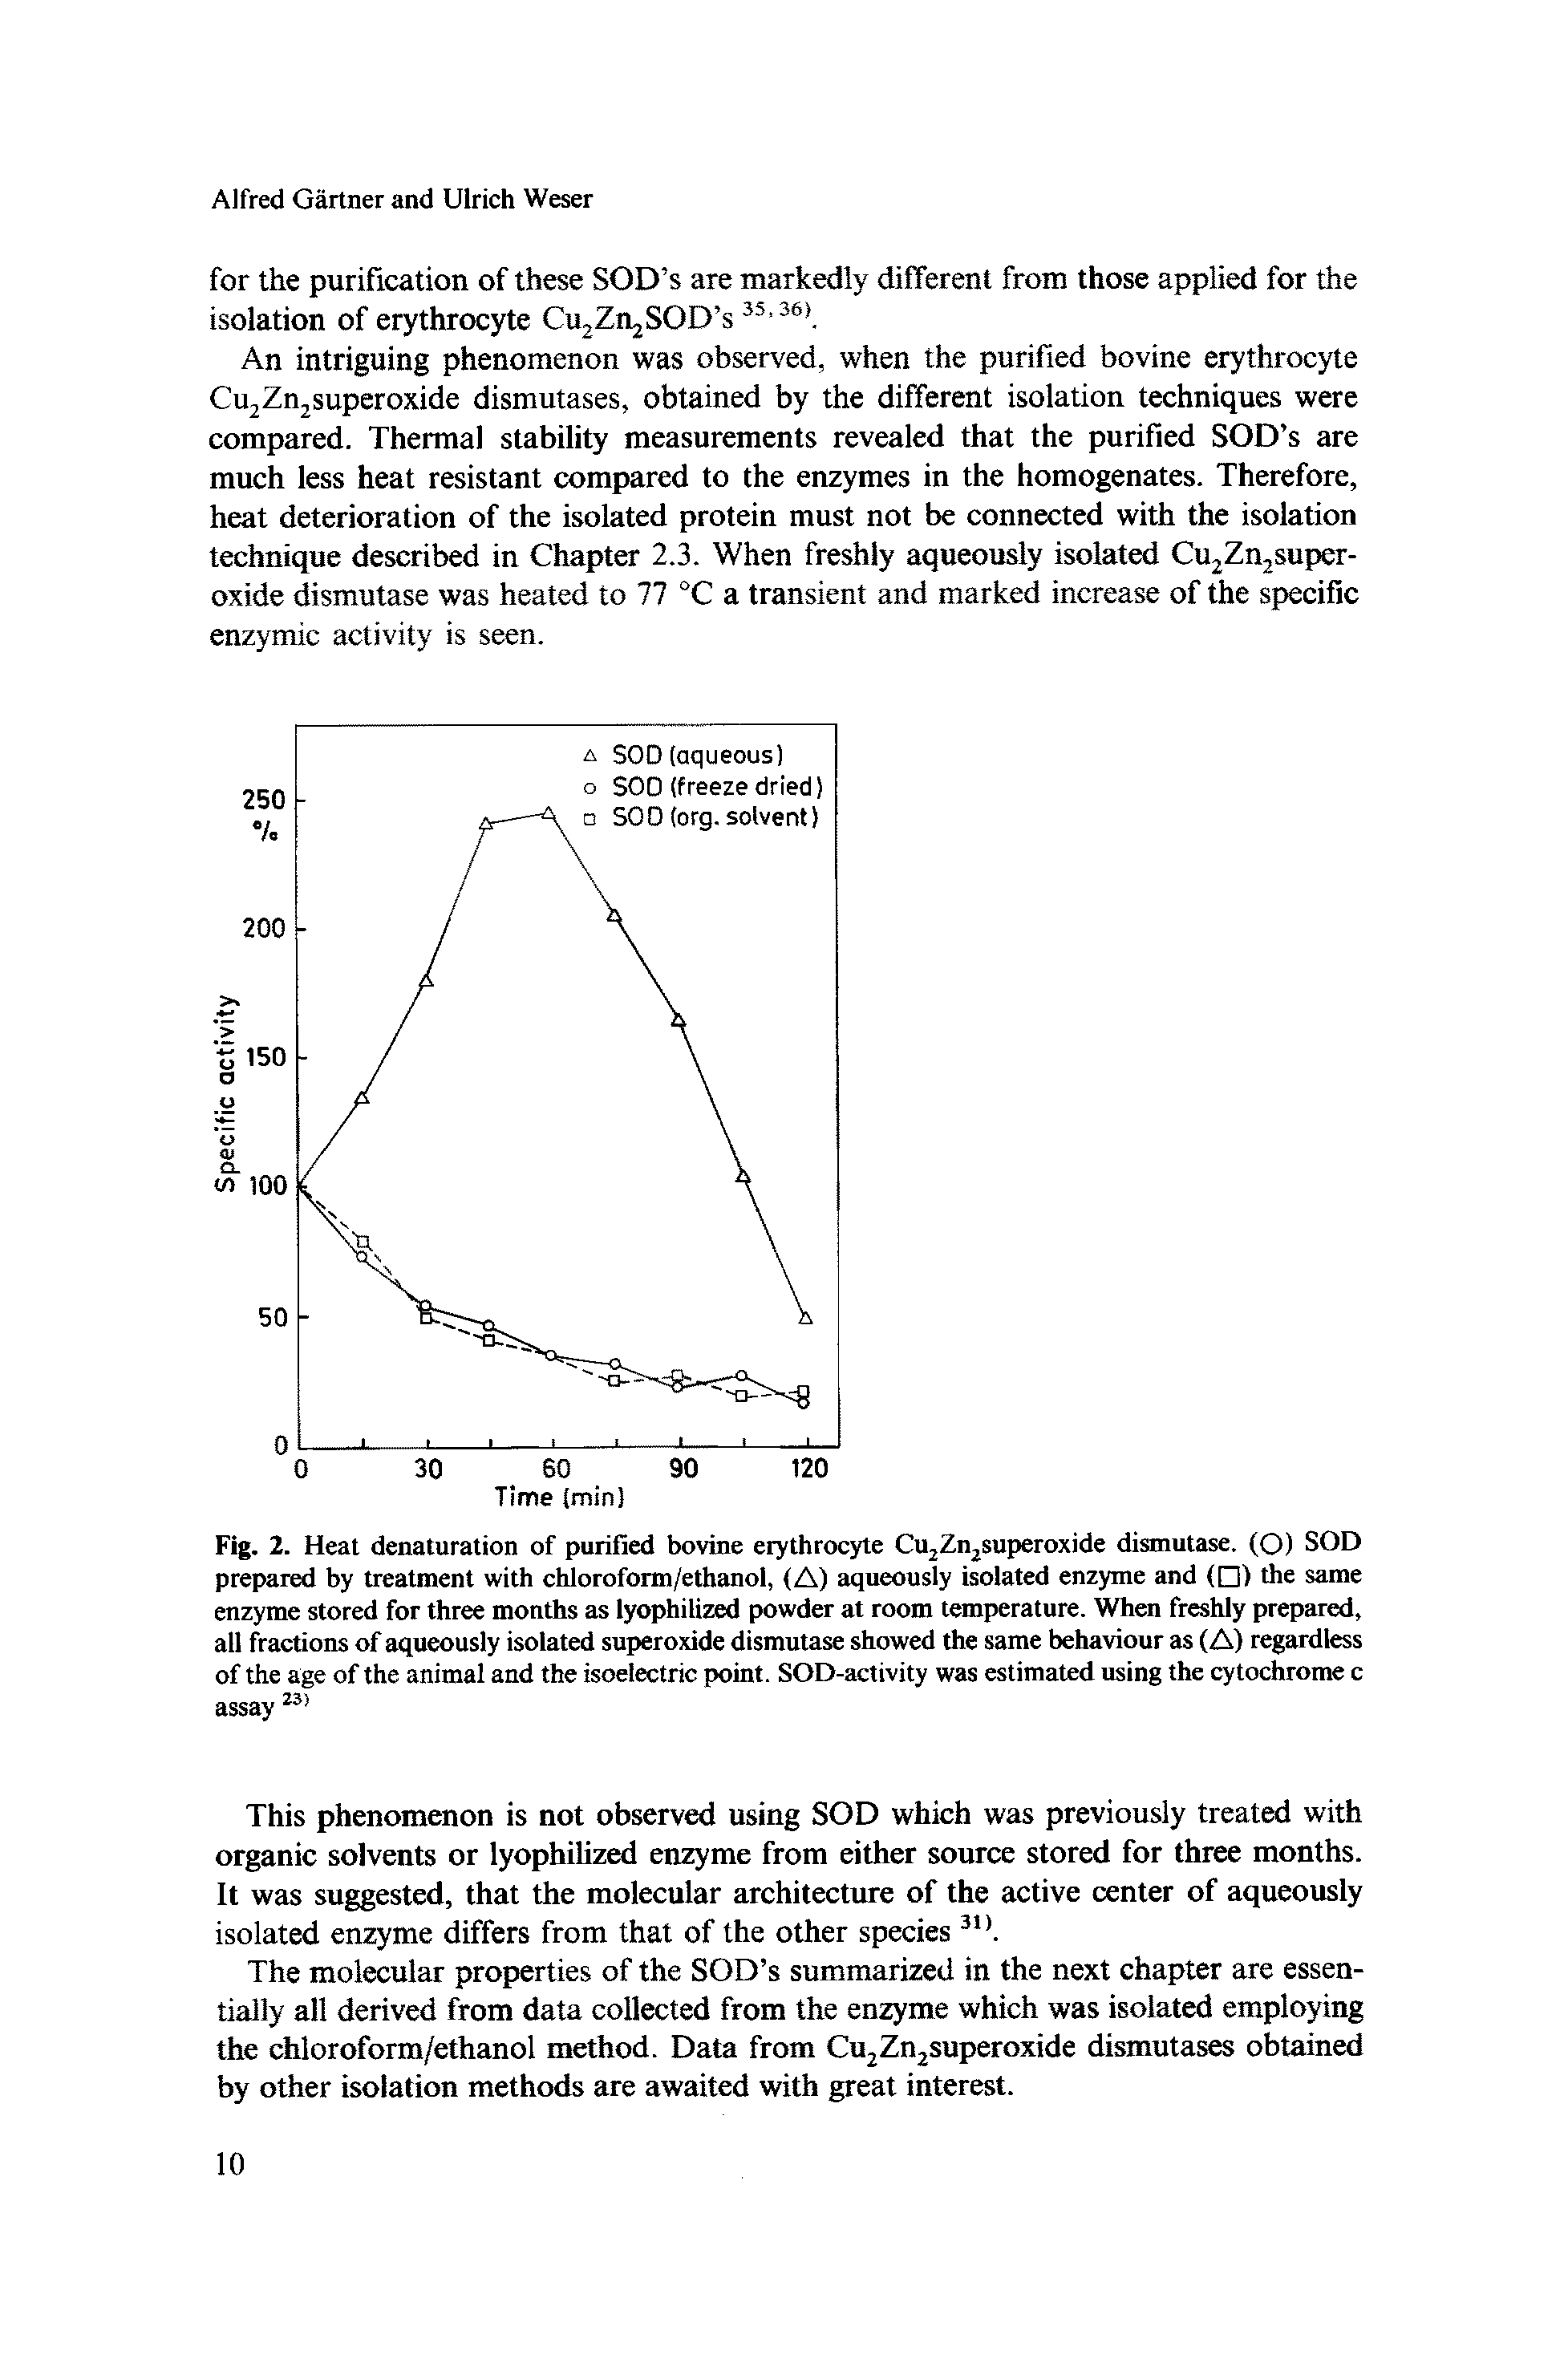 Fig. 2. Heat denaturation of purified bovine erythrocyte Cu2Zn2Superoxide dismutase. (O) SOD prepared by treatment with chloroform/ethanol, (A) aqueously isolated enzyme and ( ) the same enzyme stored for three months as lyophilized powder at room temperature. When freshly prepared, all fractions of aqueously isolated superoxide dismutase showed the same behaviour as (A) regardless of the age of the animal and the isoelectric point. SOD-activity was estimated using the cytochrome c assay...